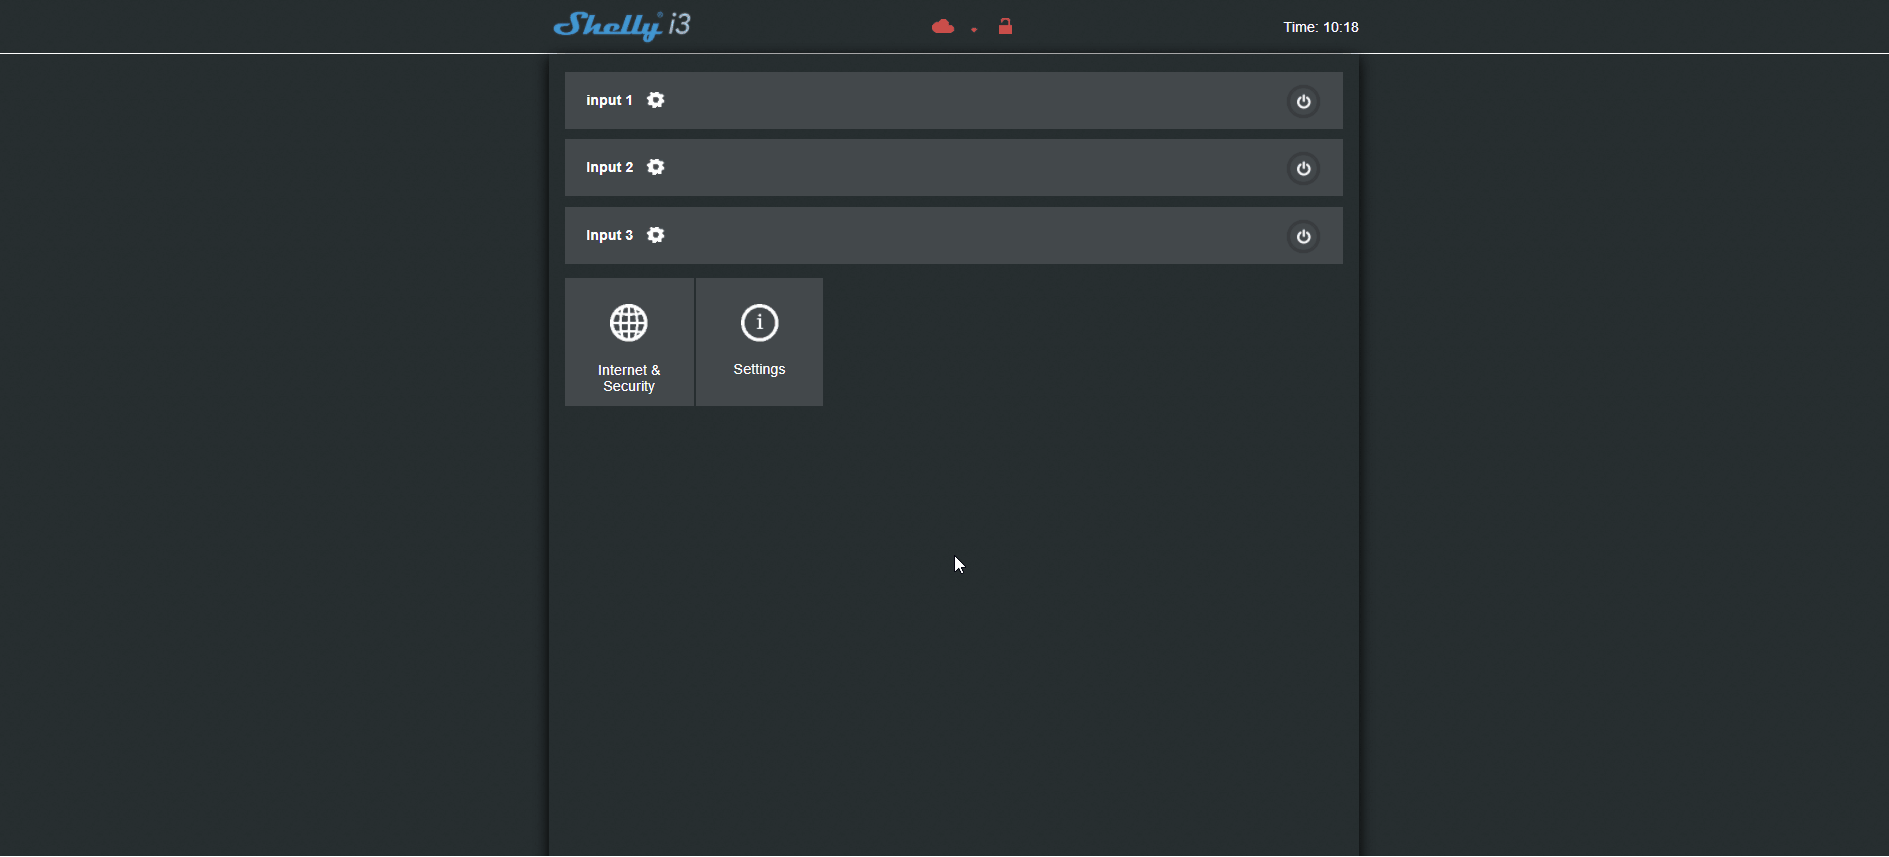 How to choose the type of switch from inside the shelly i3 web interface